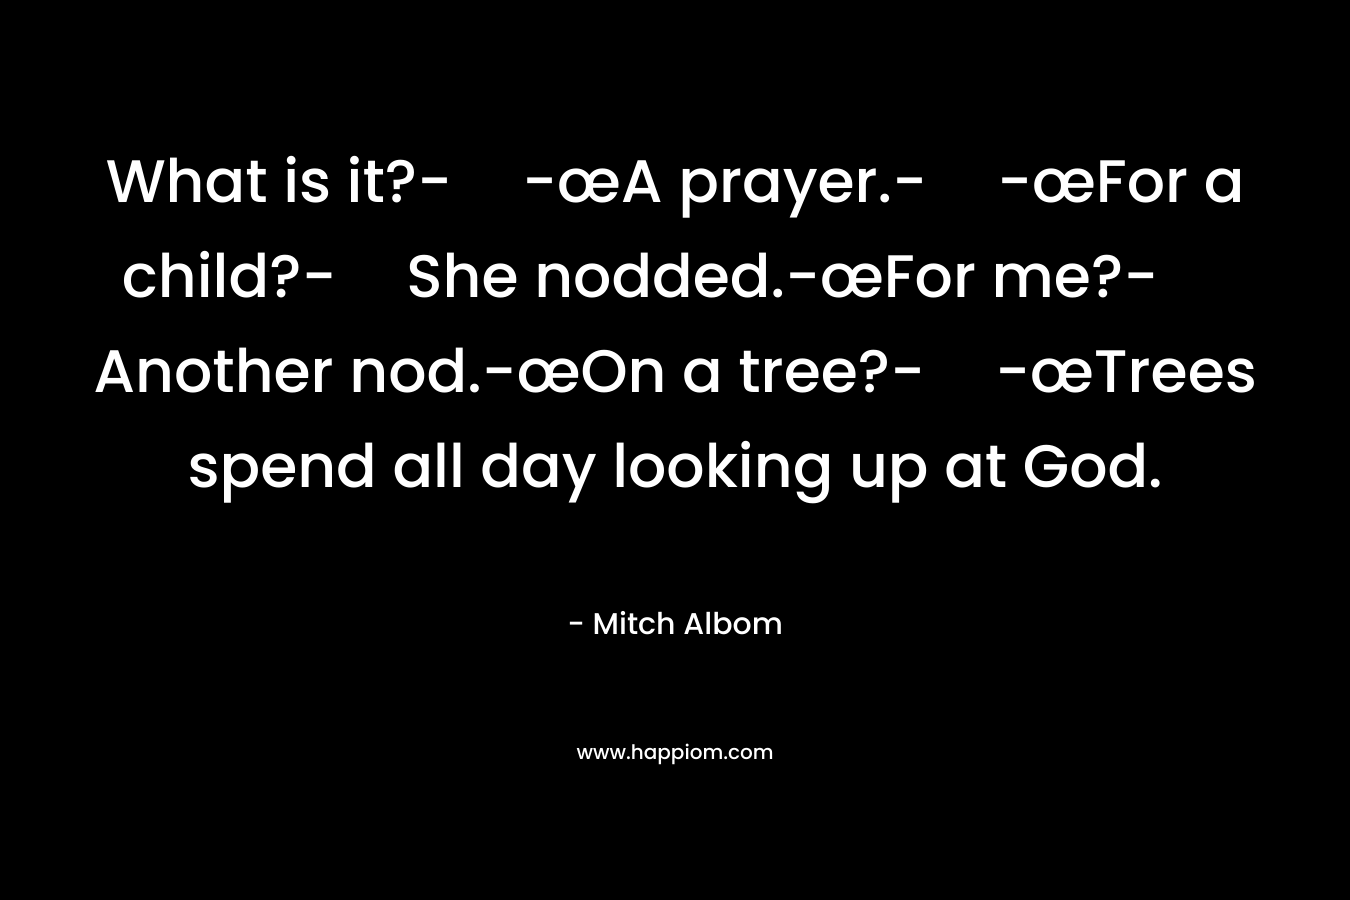 What is it?--œA prayer.--œFor a child?-She nodded.-œFor me?-Another nod.-œOn a tree?--œTrees spend all day looking up at God. – Mitch Albom